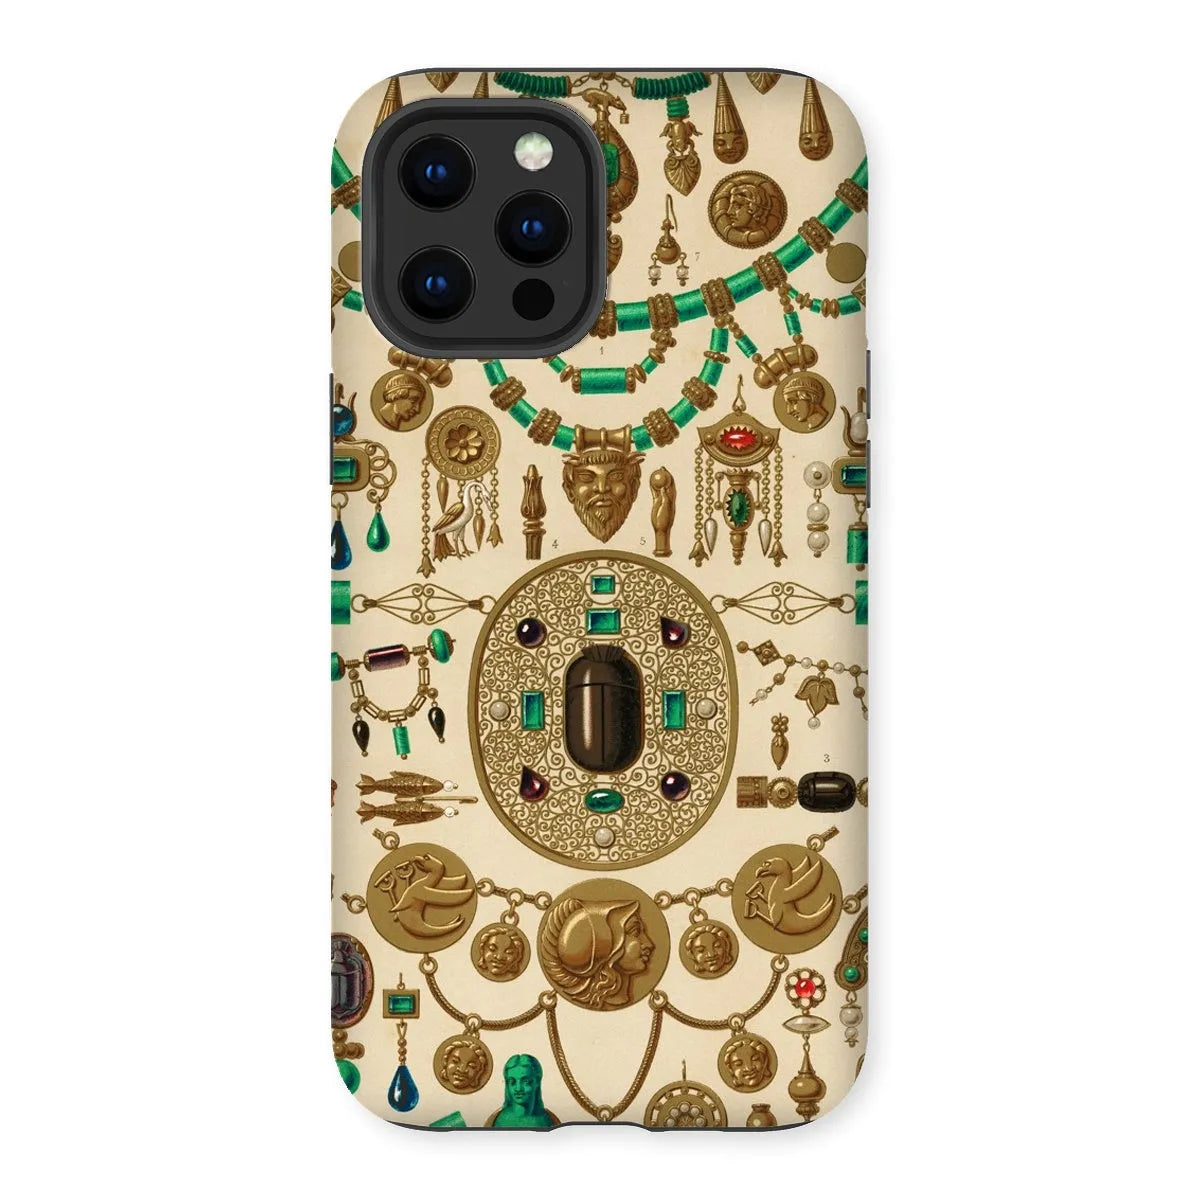 Etruscan Jewelry By Auguste Racinet Art Phone Case - Iphone 12 Pro Max / Matte - Mobile Phone Cases - Aesthetic Art